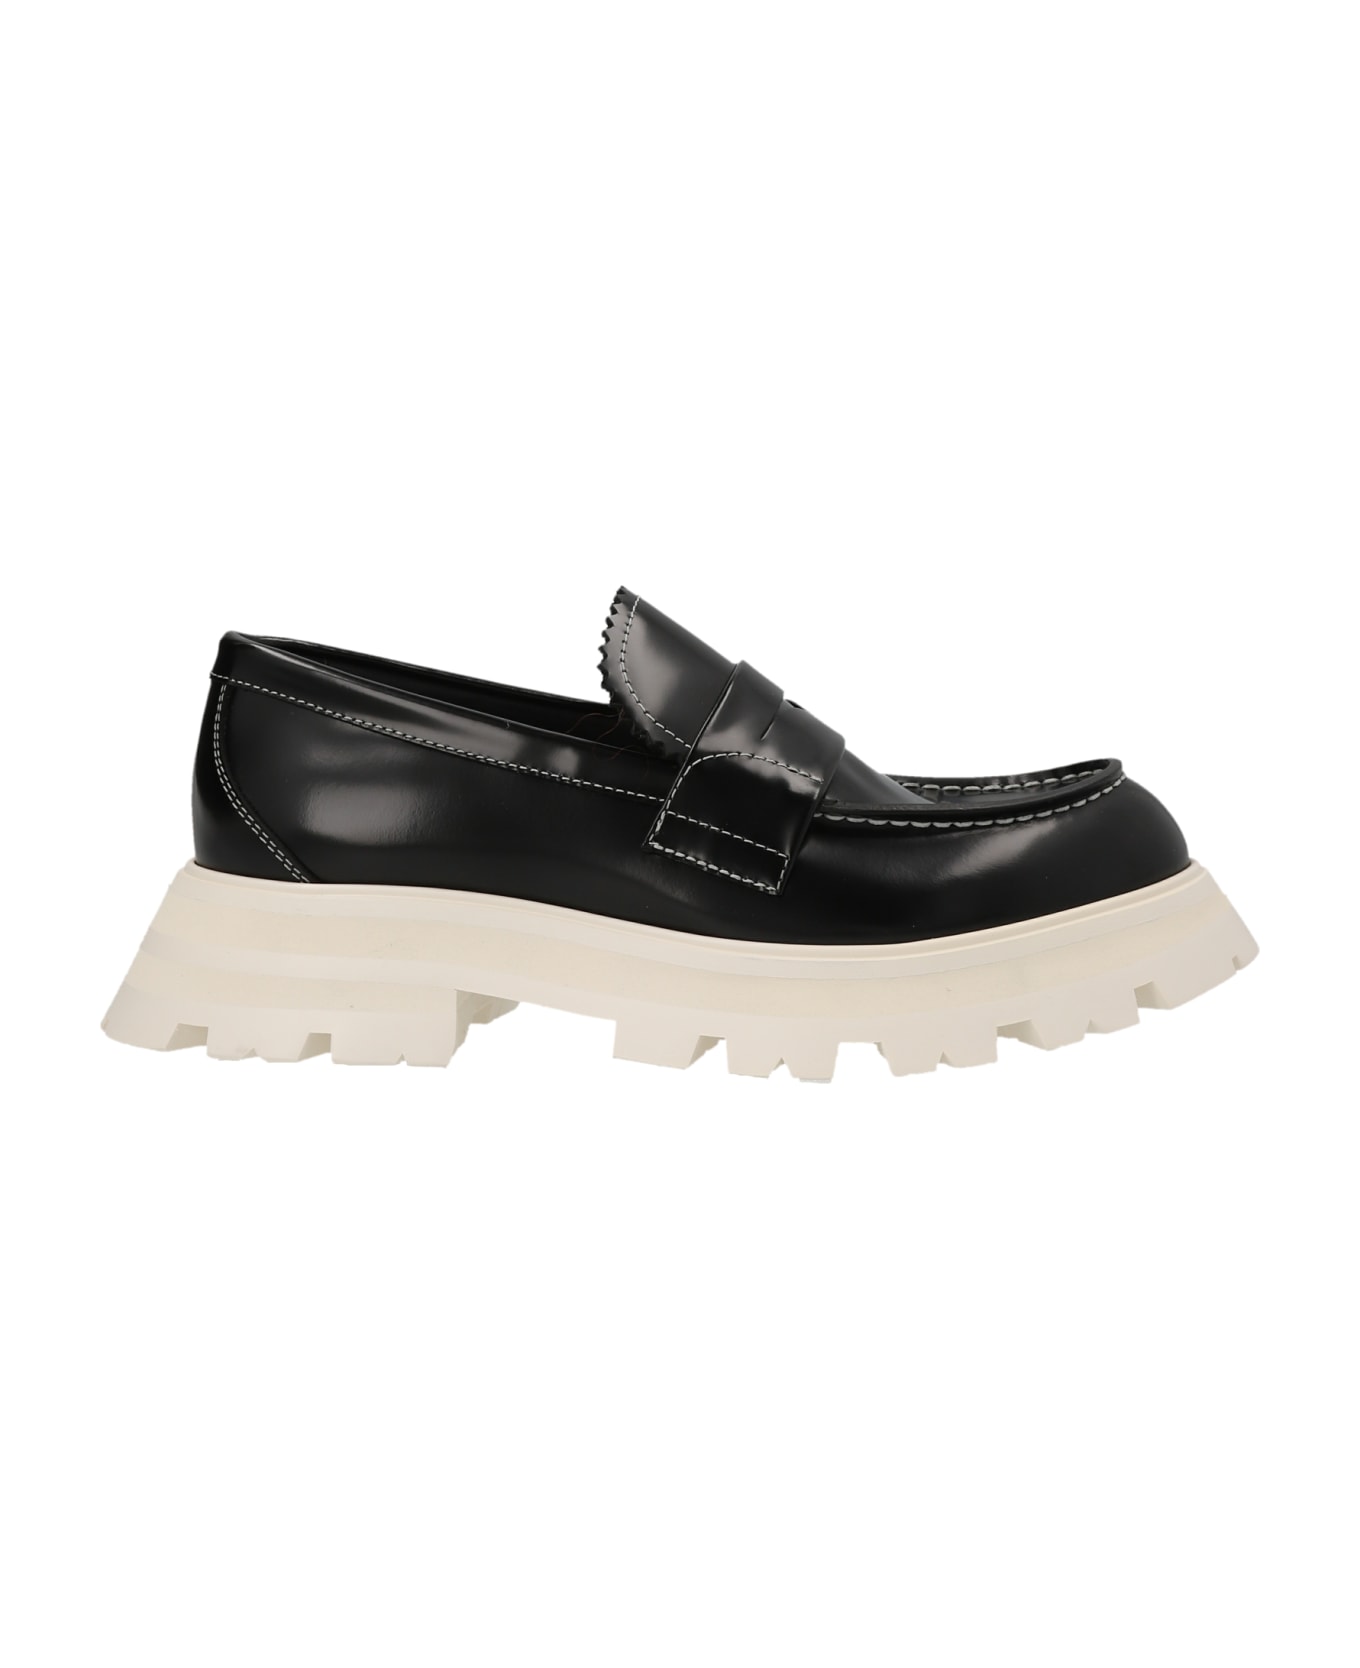 Alexander McQueen Leather Loafers - White/Black フラットシューズ